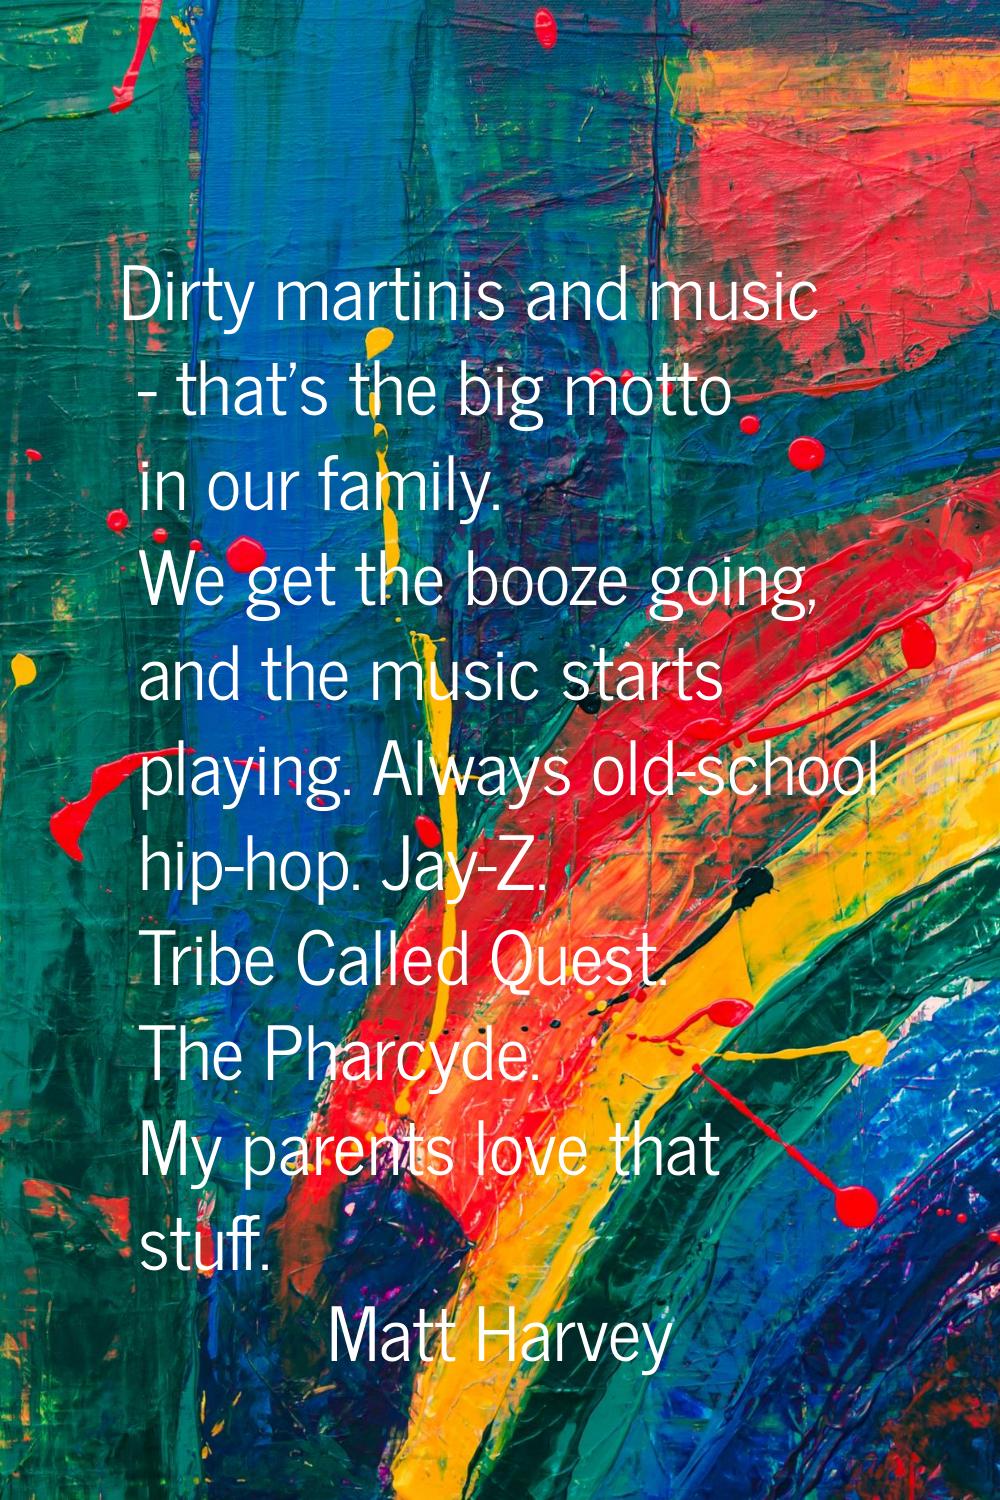 Dirty martinis and music - that's the big motto in our family. We get the booze going, and the musi